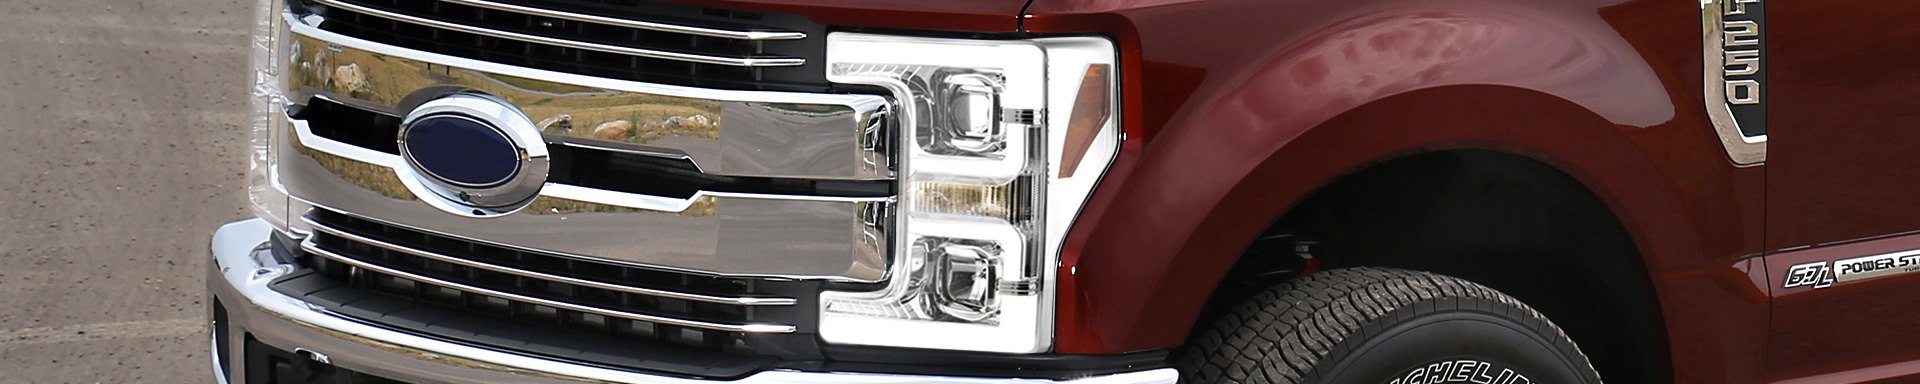 New Signature Series Spyder Lights For Ford F-Series HD That You Can Buy Today!